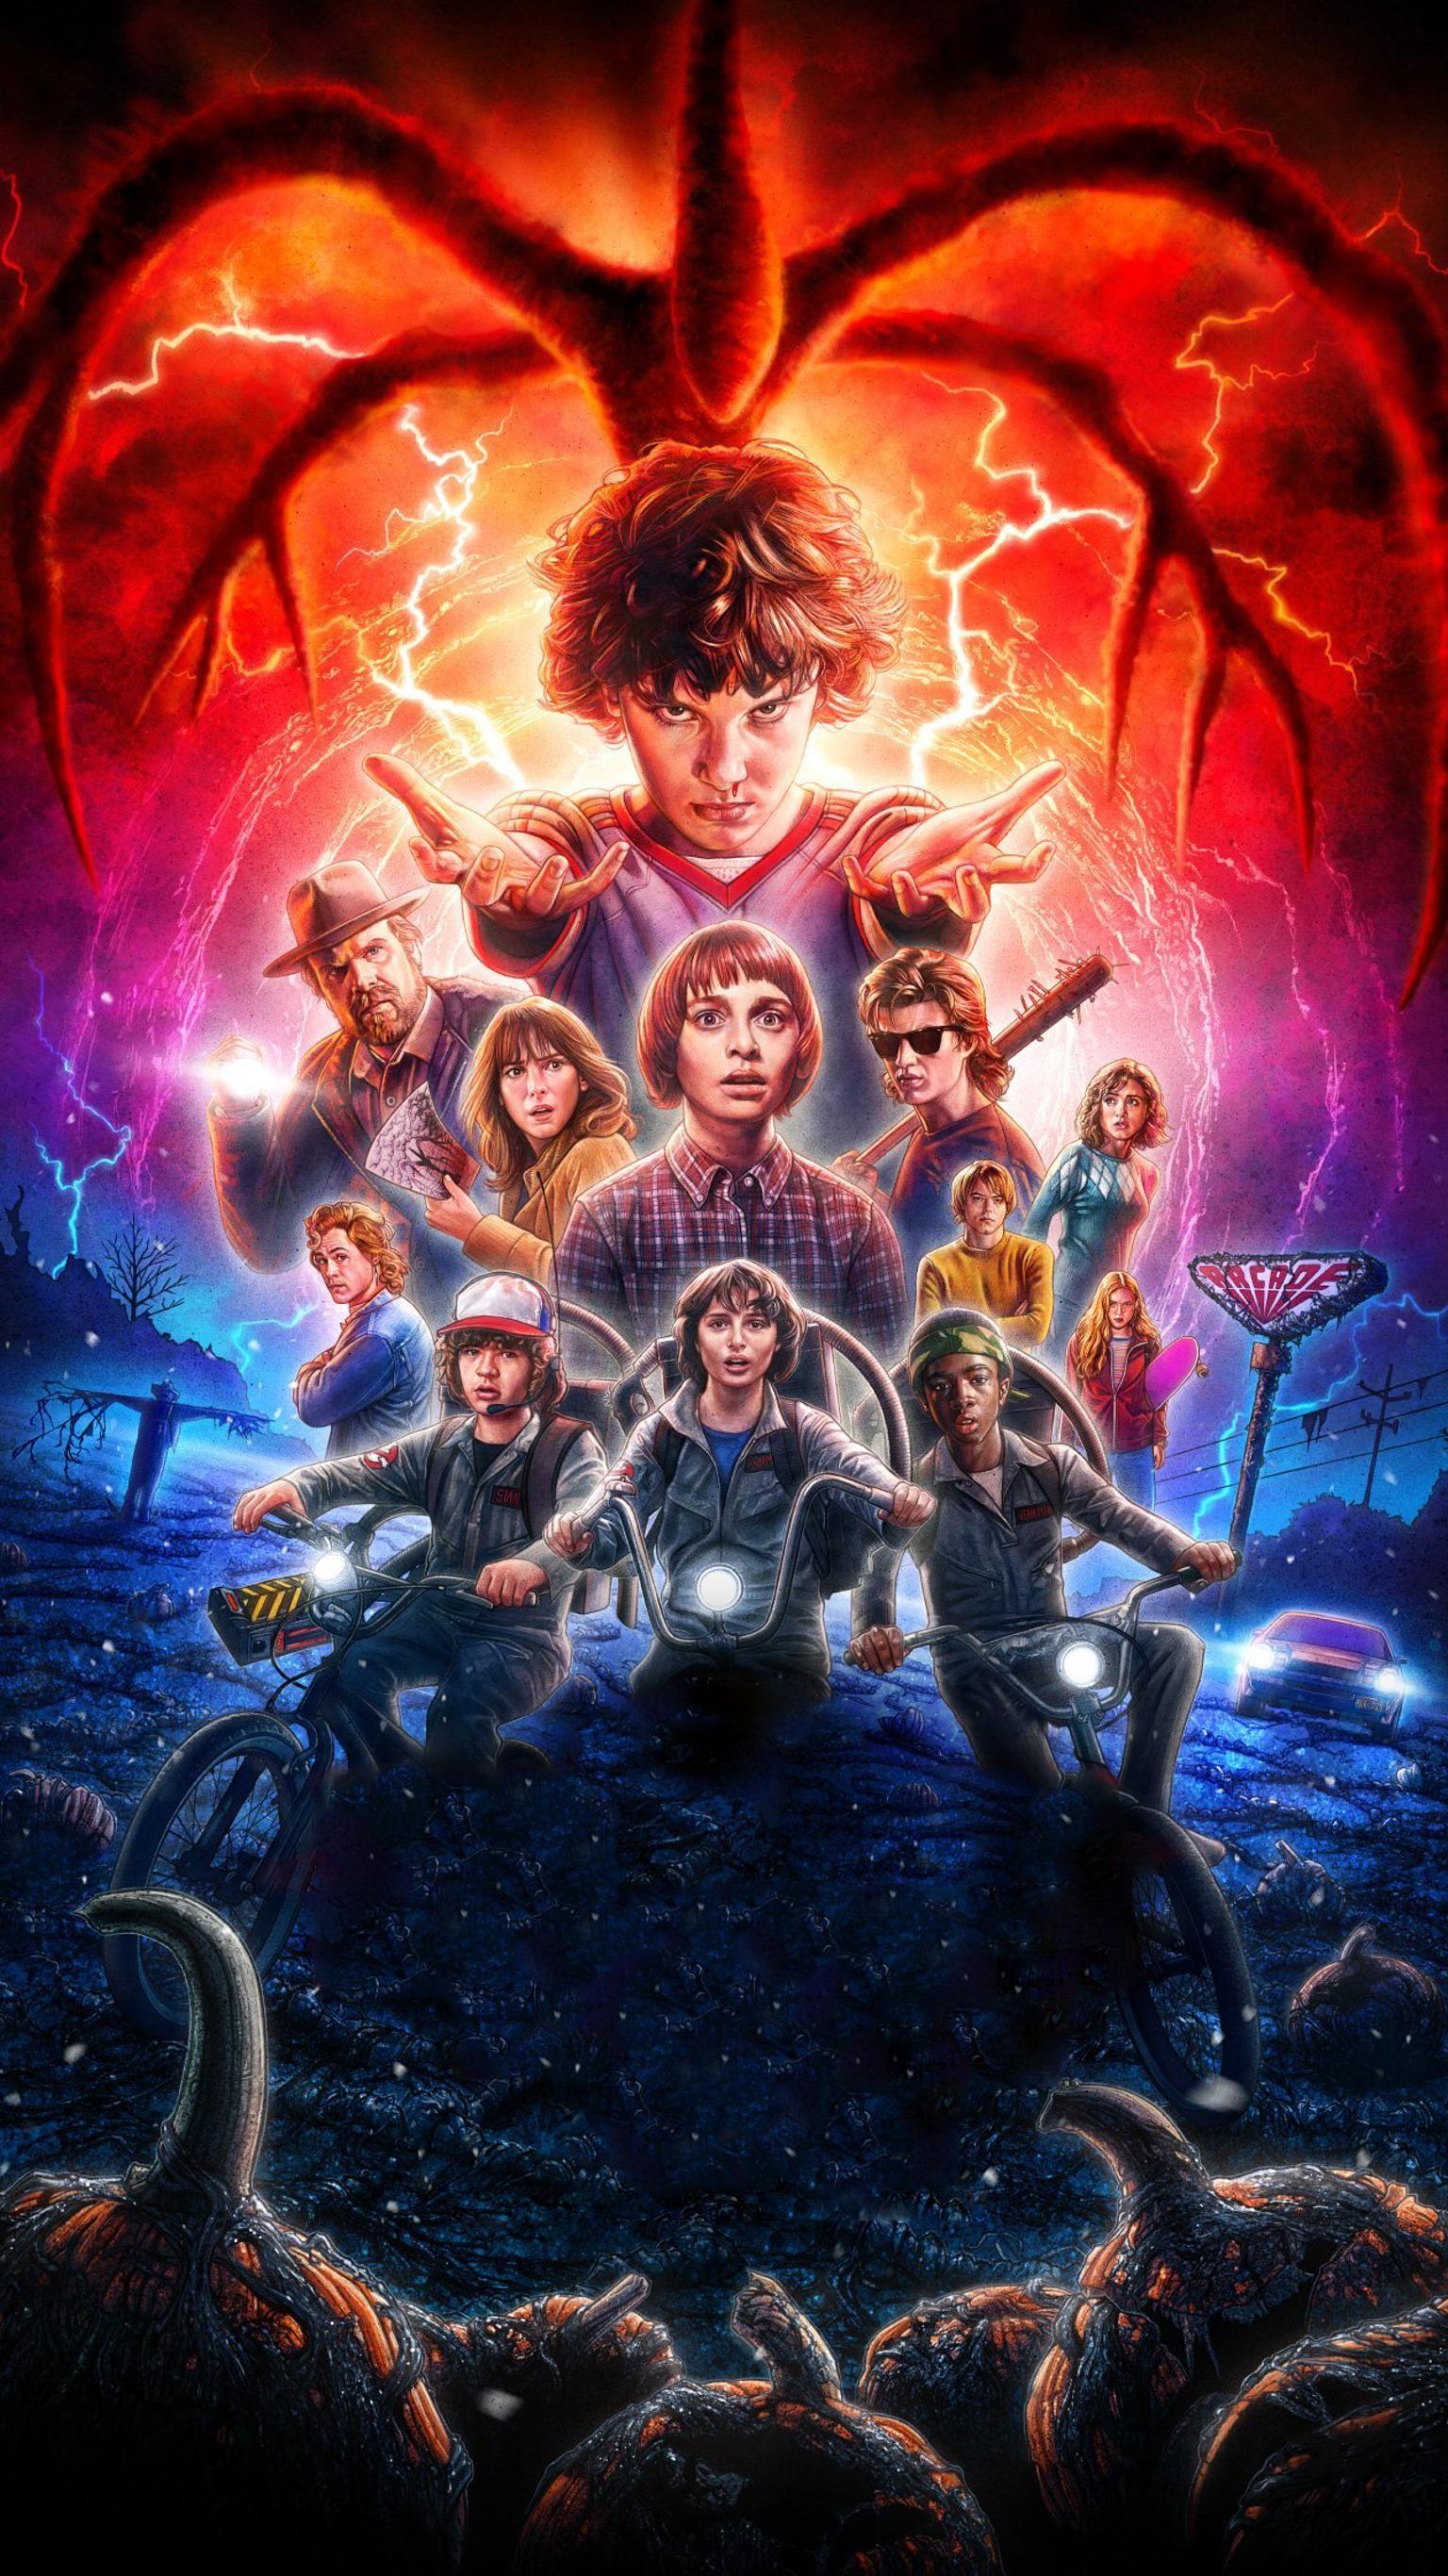 Stranger Things Wallpaper background picture